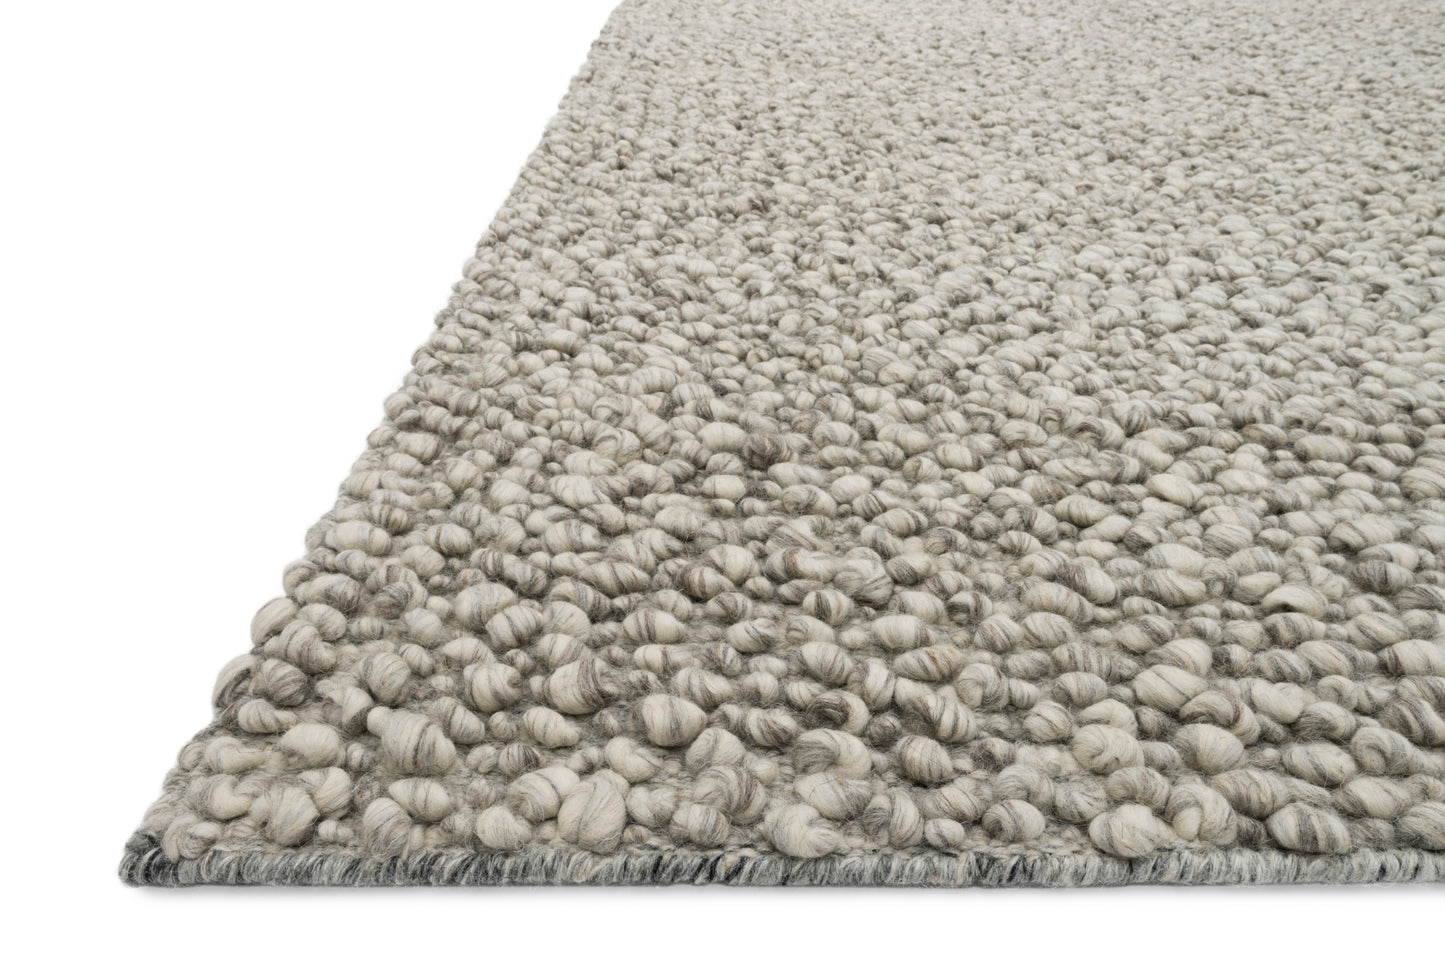 Quarry ED Wool Indoor Area Rug from Loloi